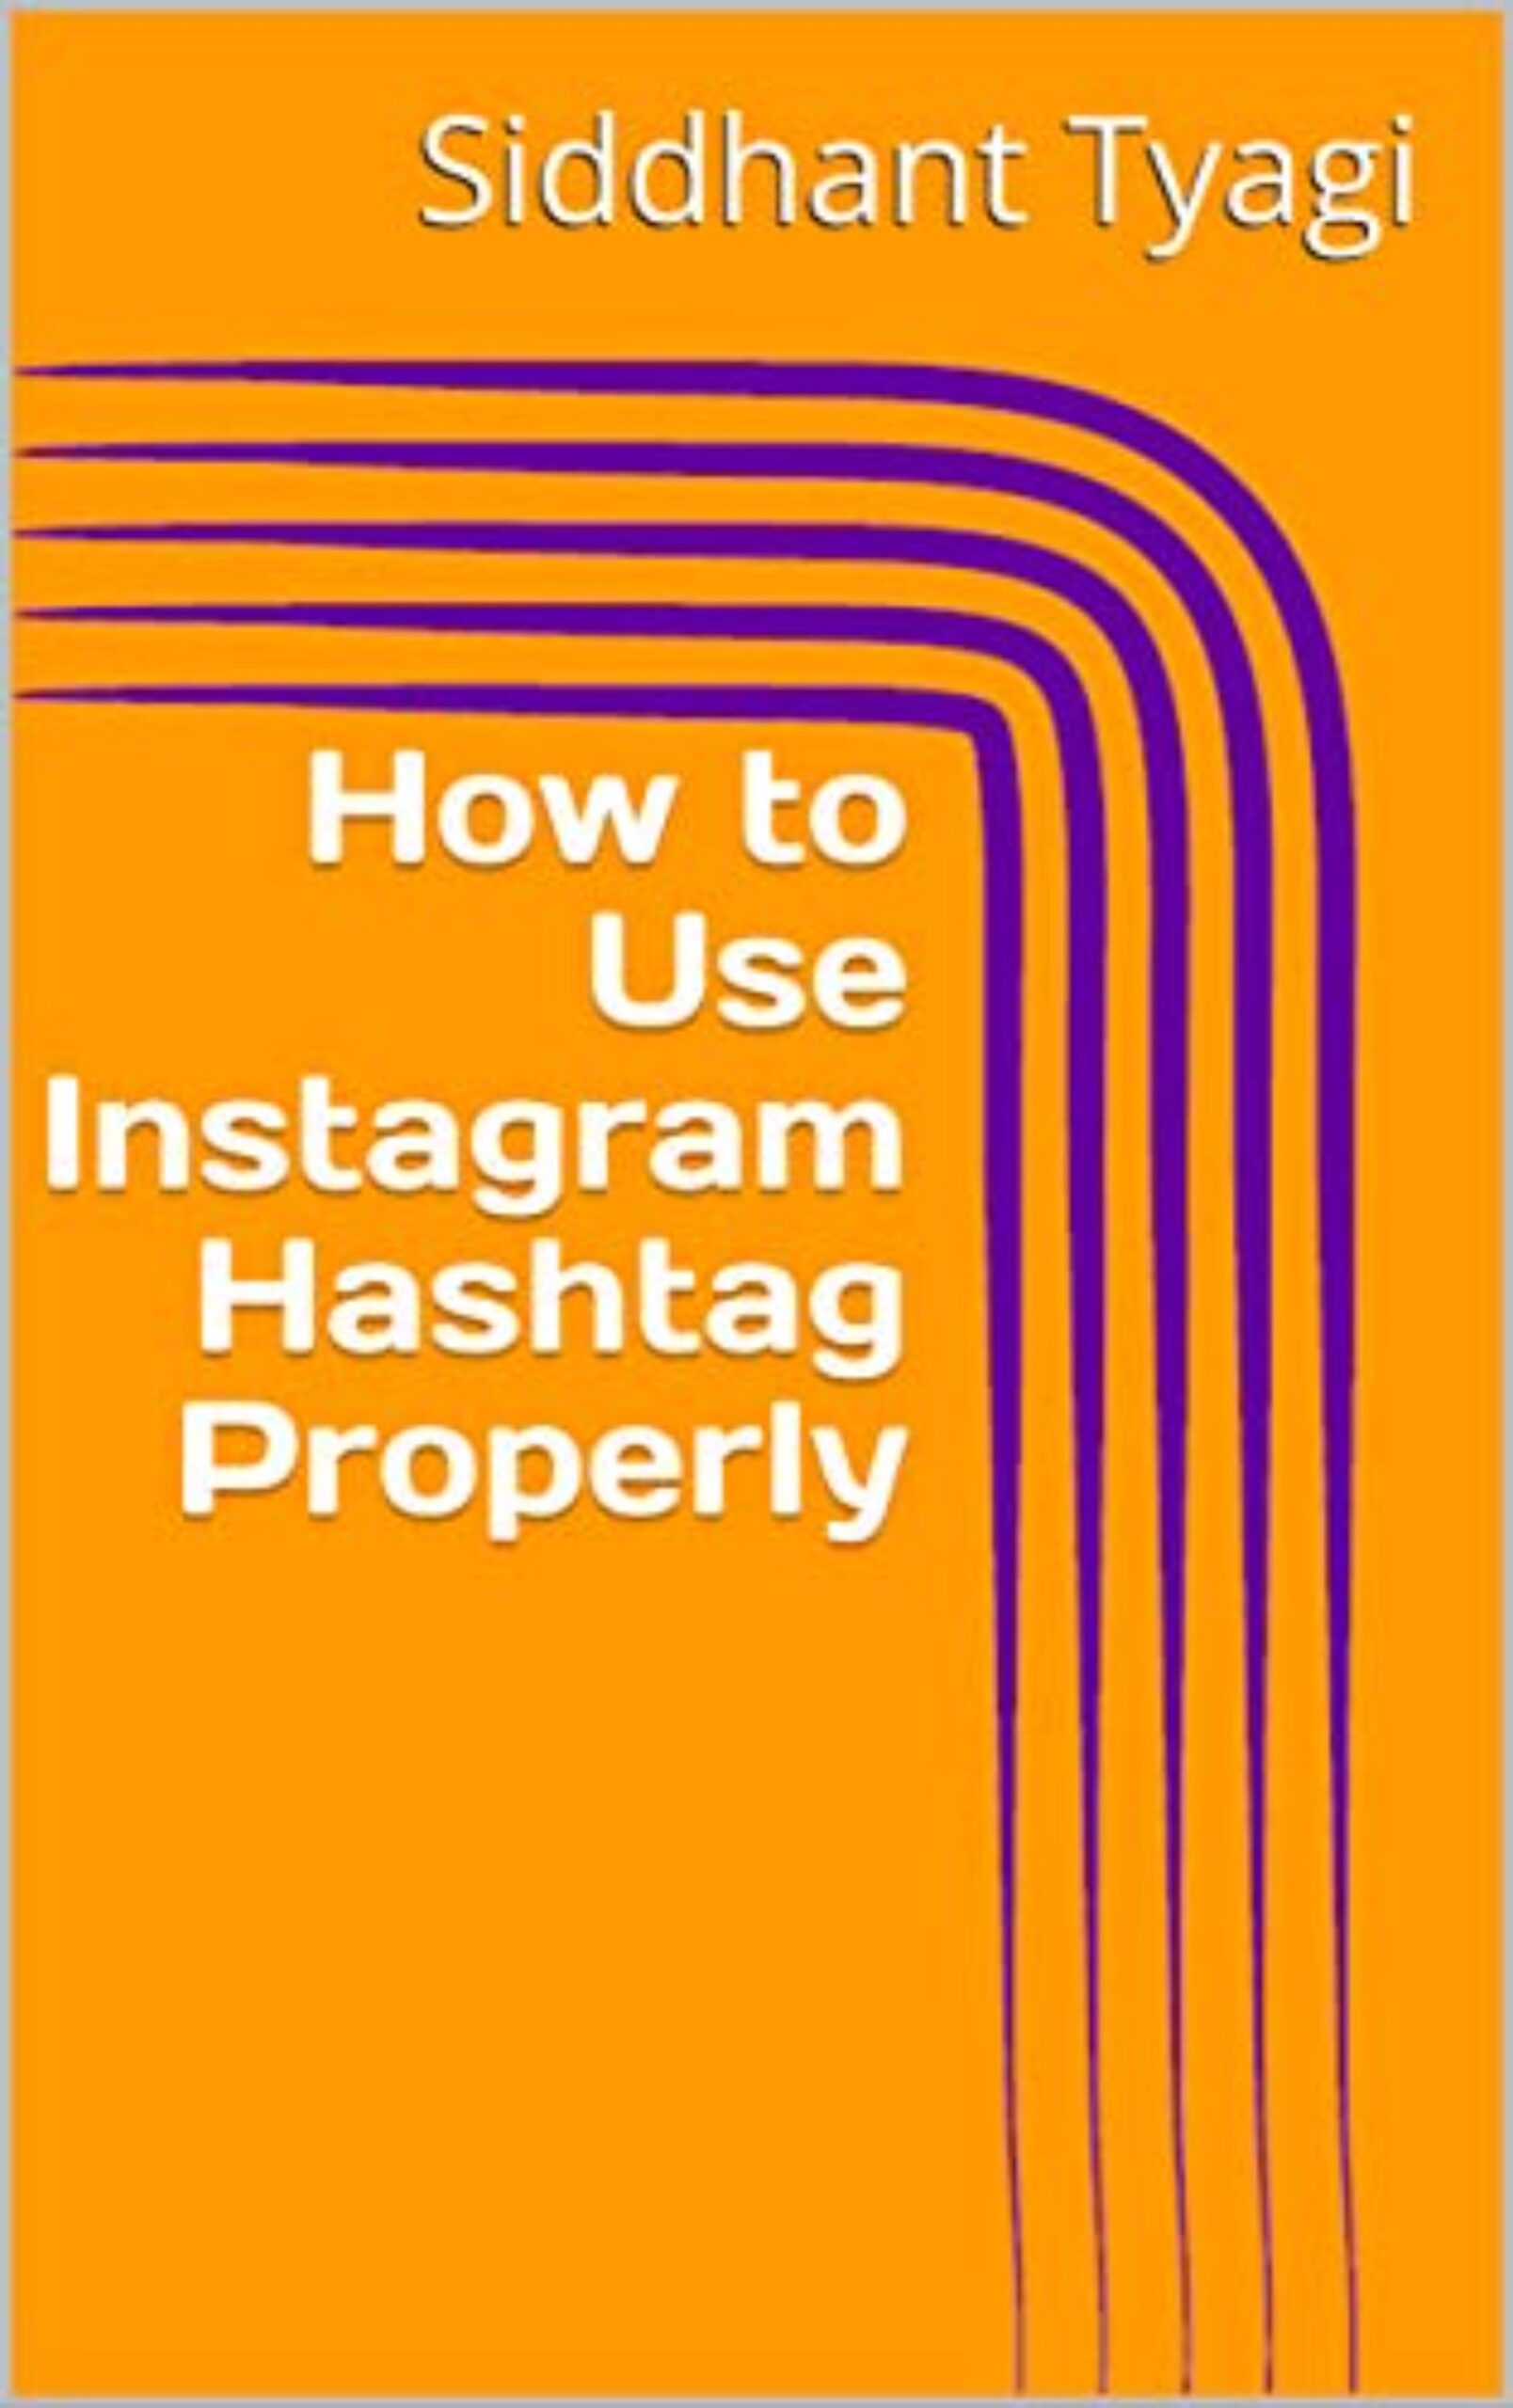 FREE: How to Use Instagram Hashtag Properly by Siddhant Tyagi